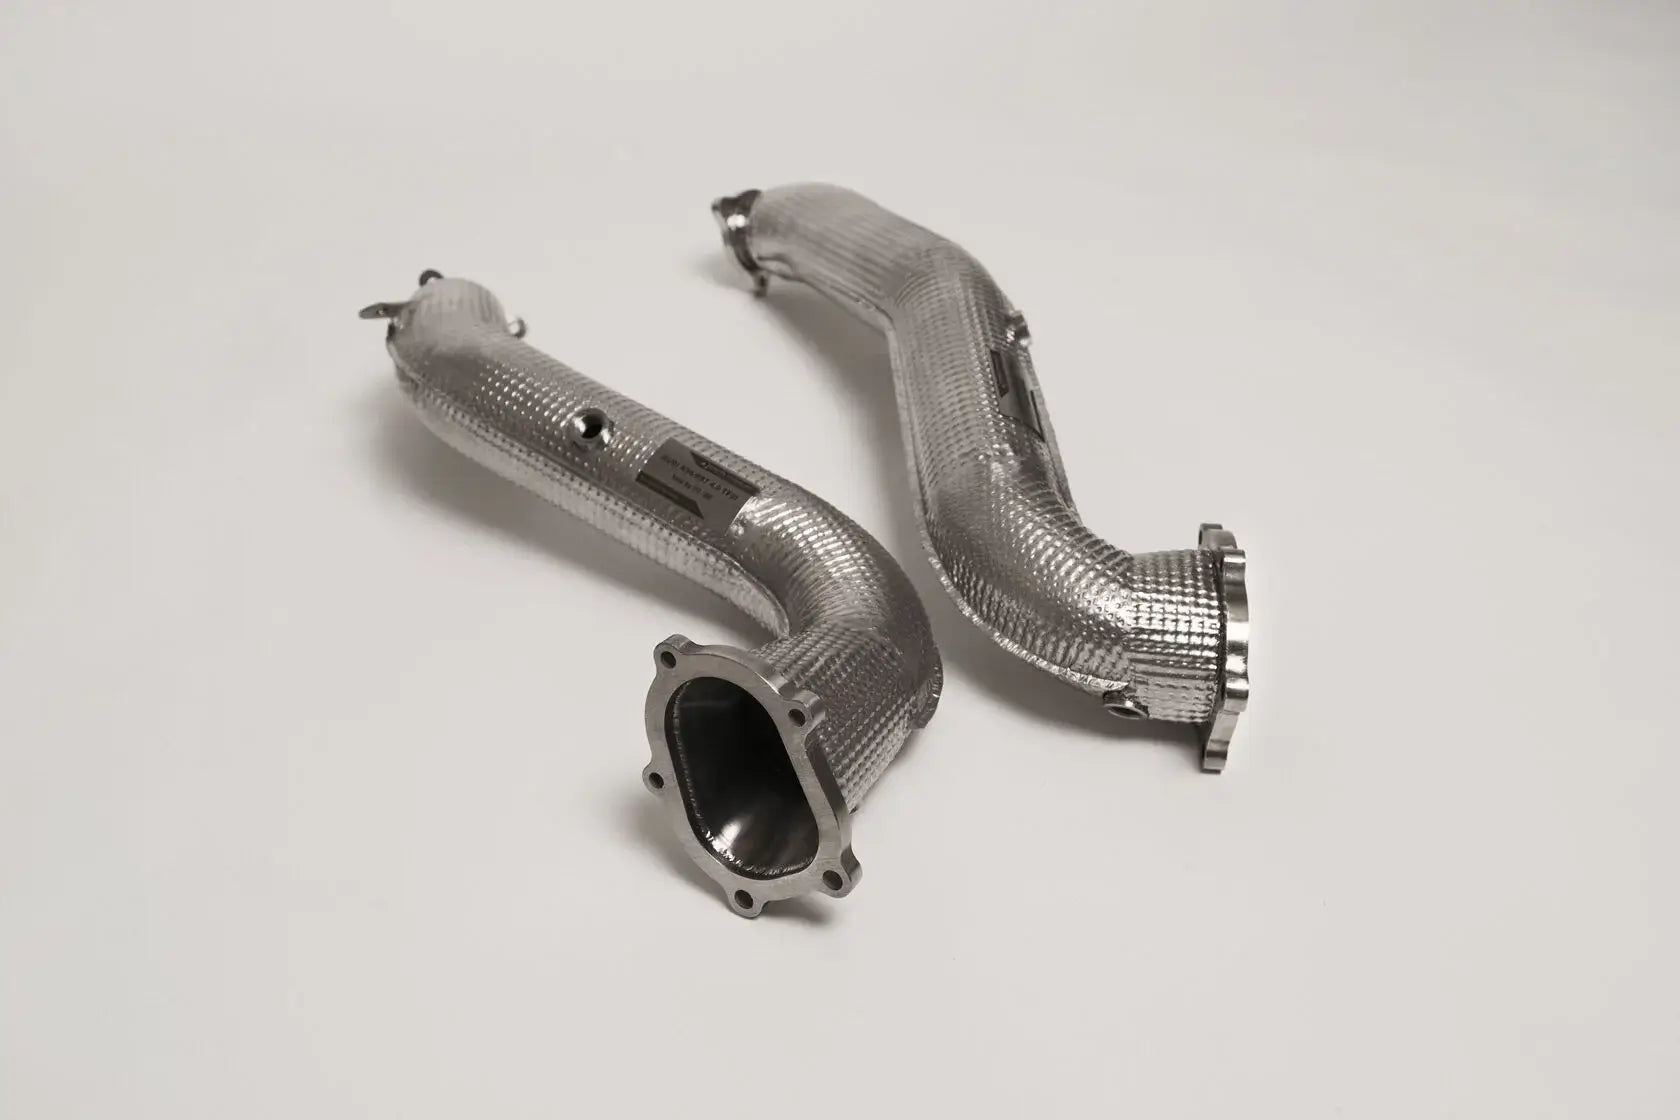 DEIKIN 10-AUDI.RS7.C7-DP Downpipe for AUDI RS7 (C7) without HeatShield Photo-2 